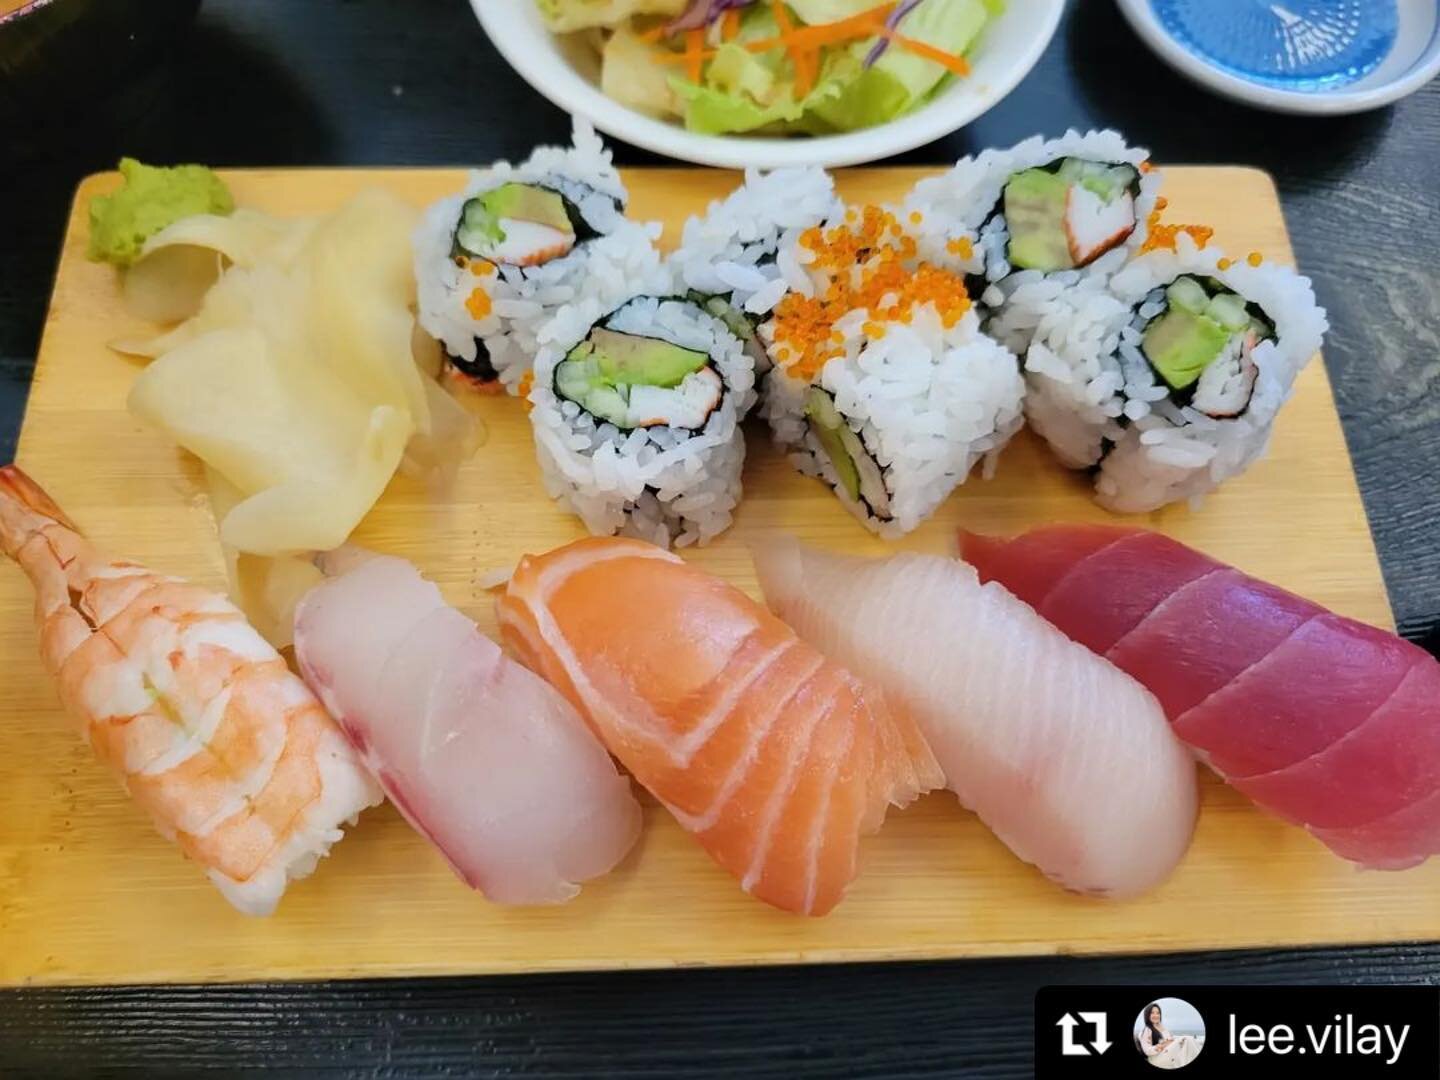 This is why we love Kaita, too! 🥰 Thanks for visiting, Vilay! #Repost @lee.vilay 
・・・
I love Japanese food for it's simplicity and amazing natural flavors! Beautiful food, generous portions and great service! 

#sushi #udon #japanesefood #tempura #b